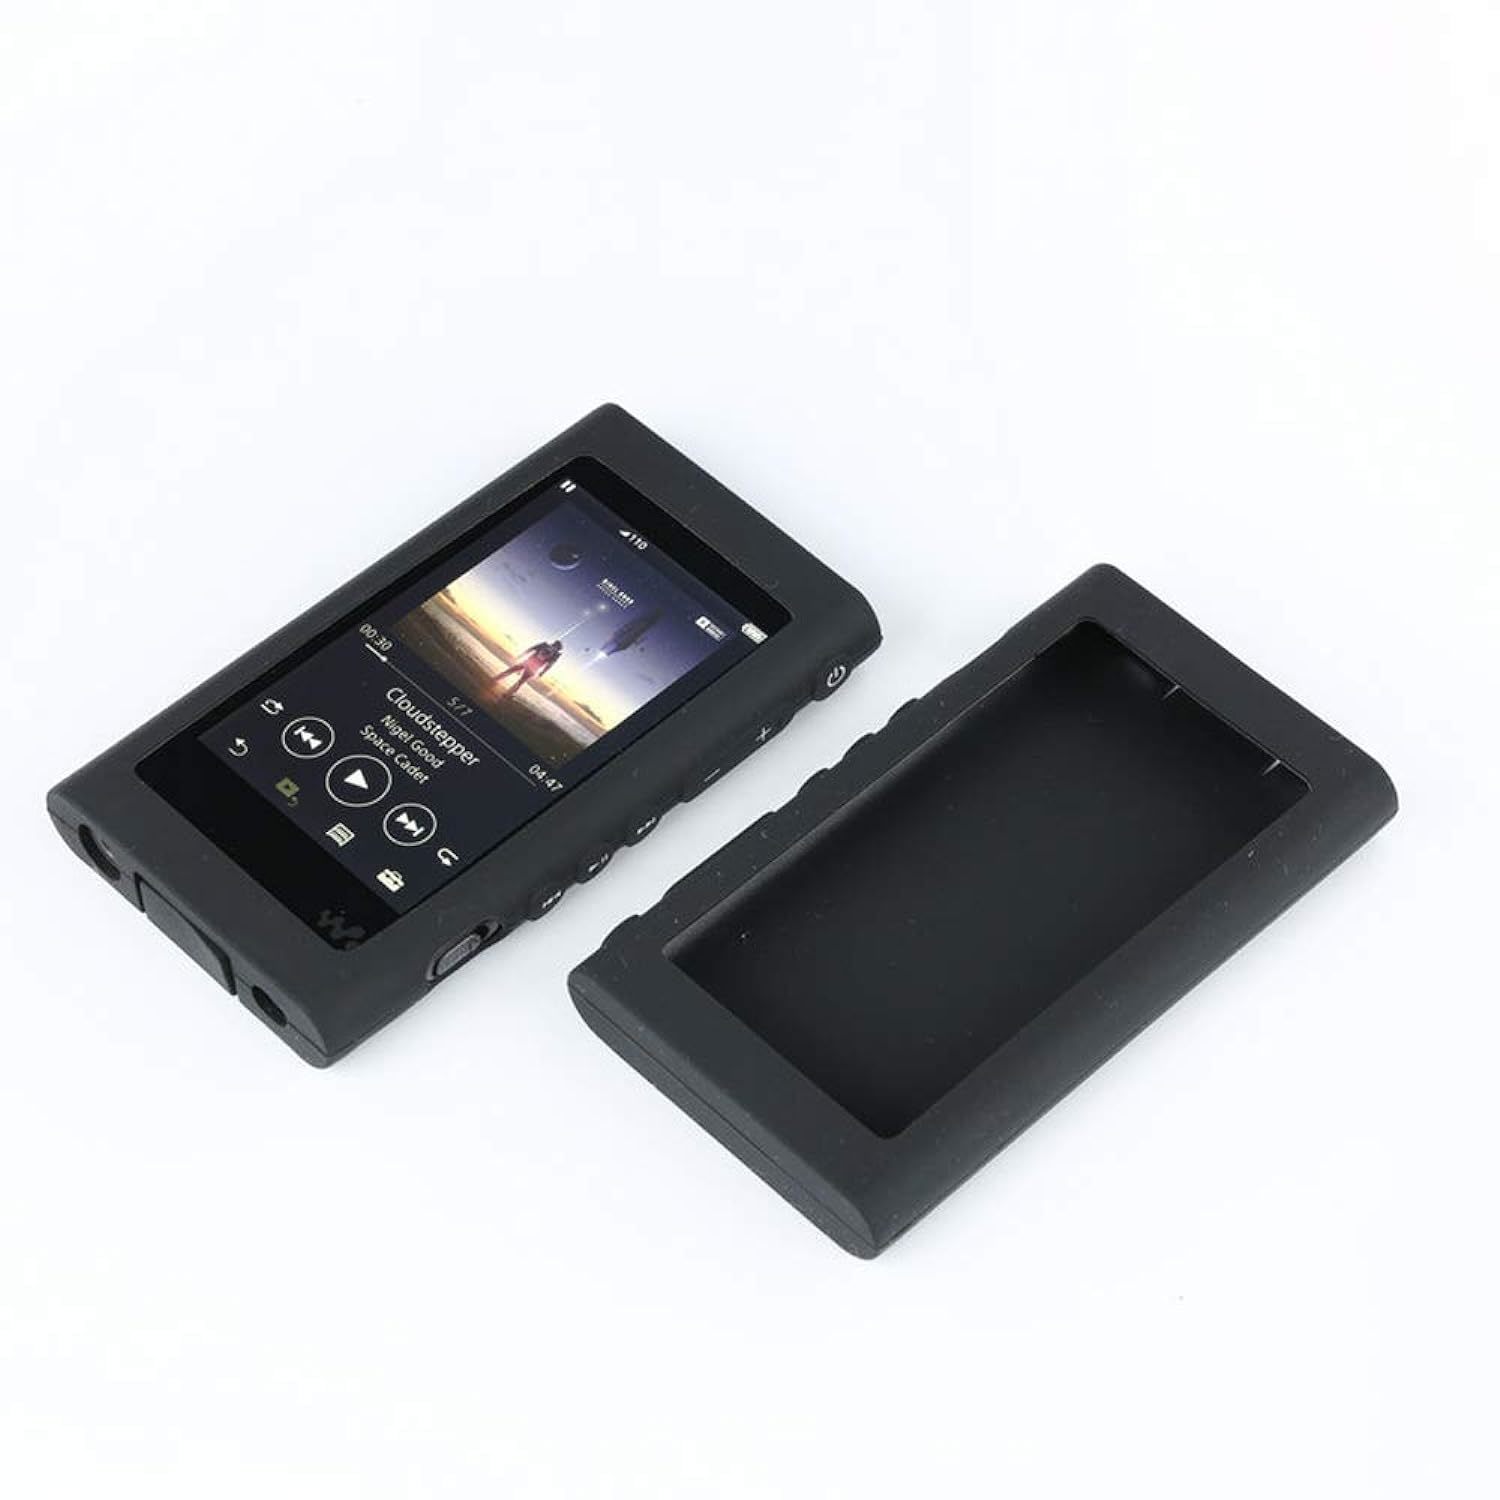 Sony A55 Case, Soft Silicone Protective Skin Case Cover For Sony Walkman Nw-A55H - $14.99